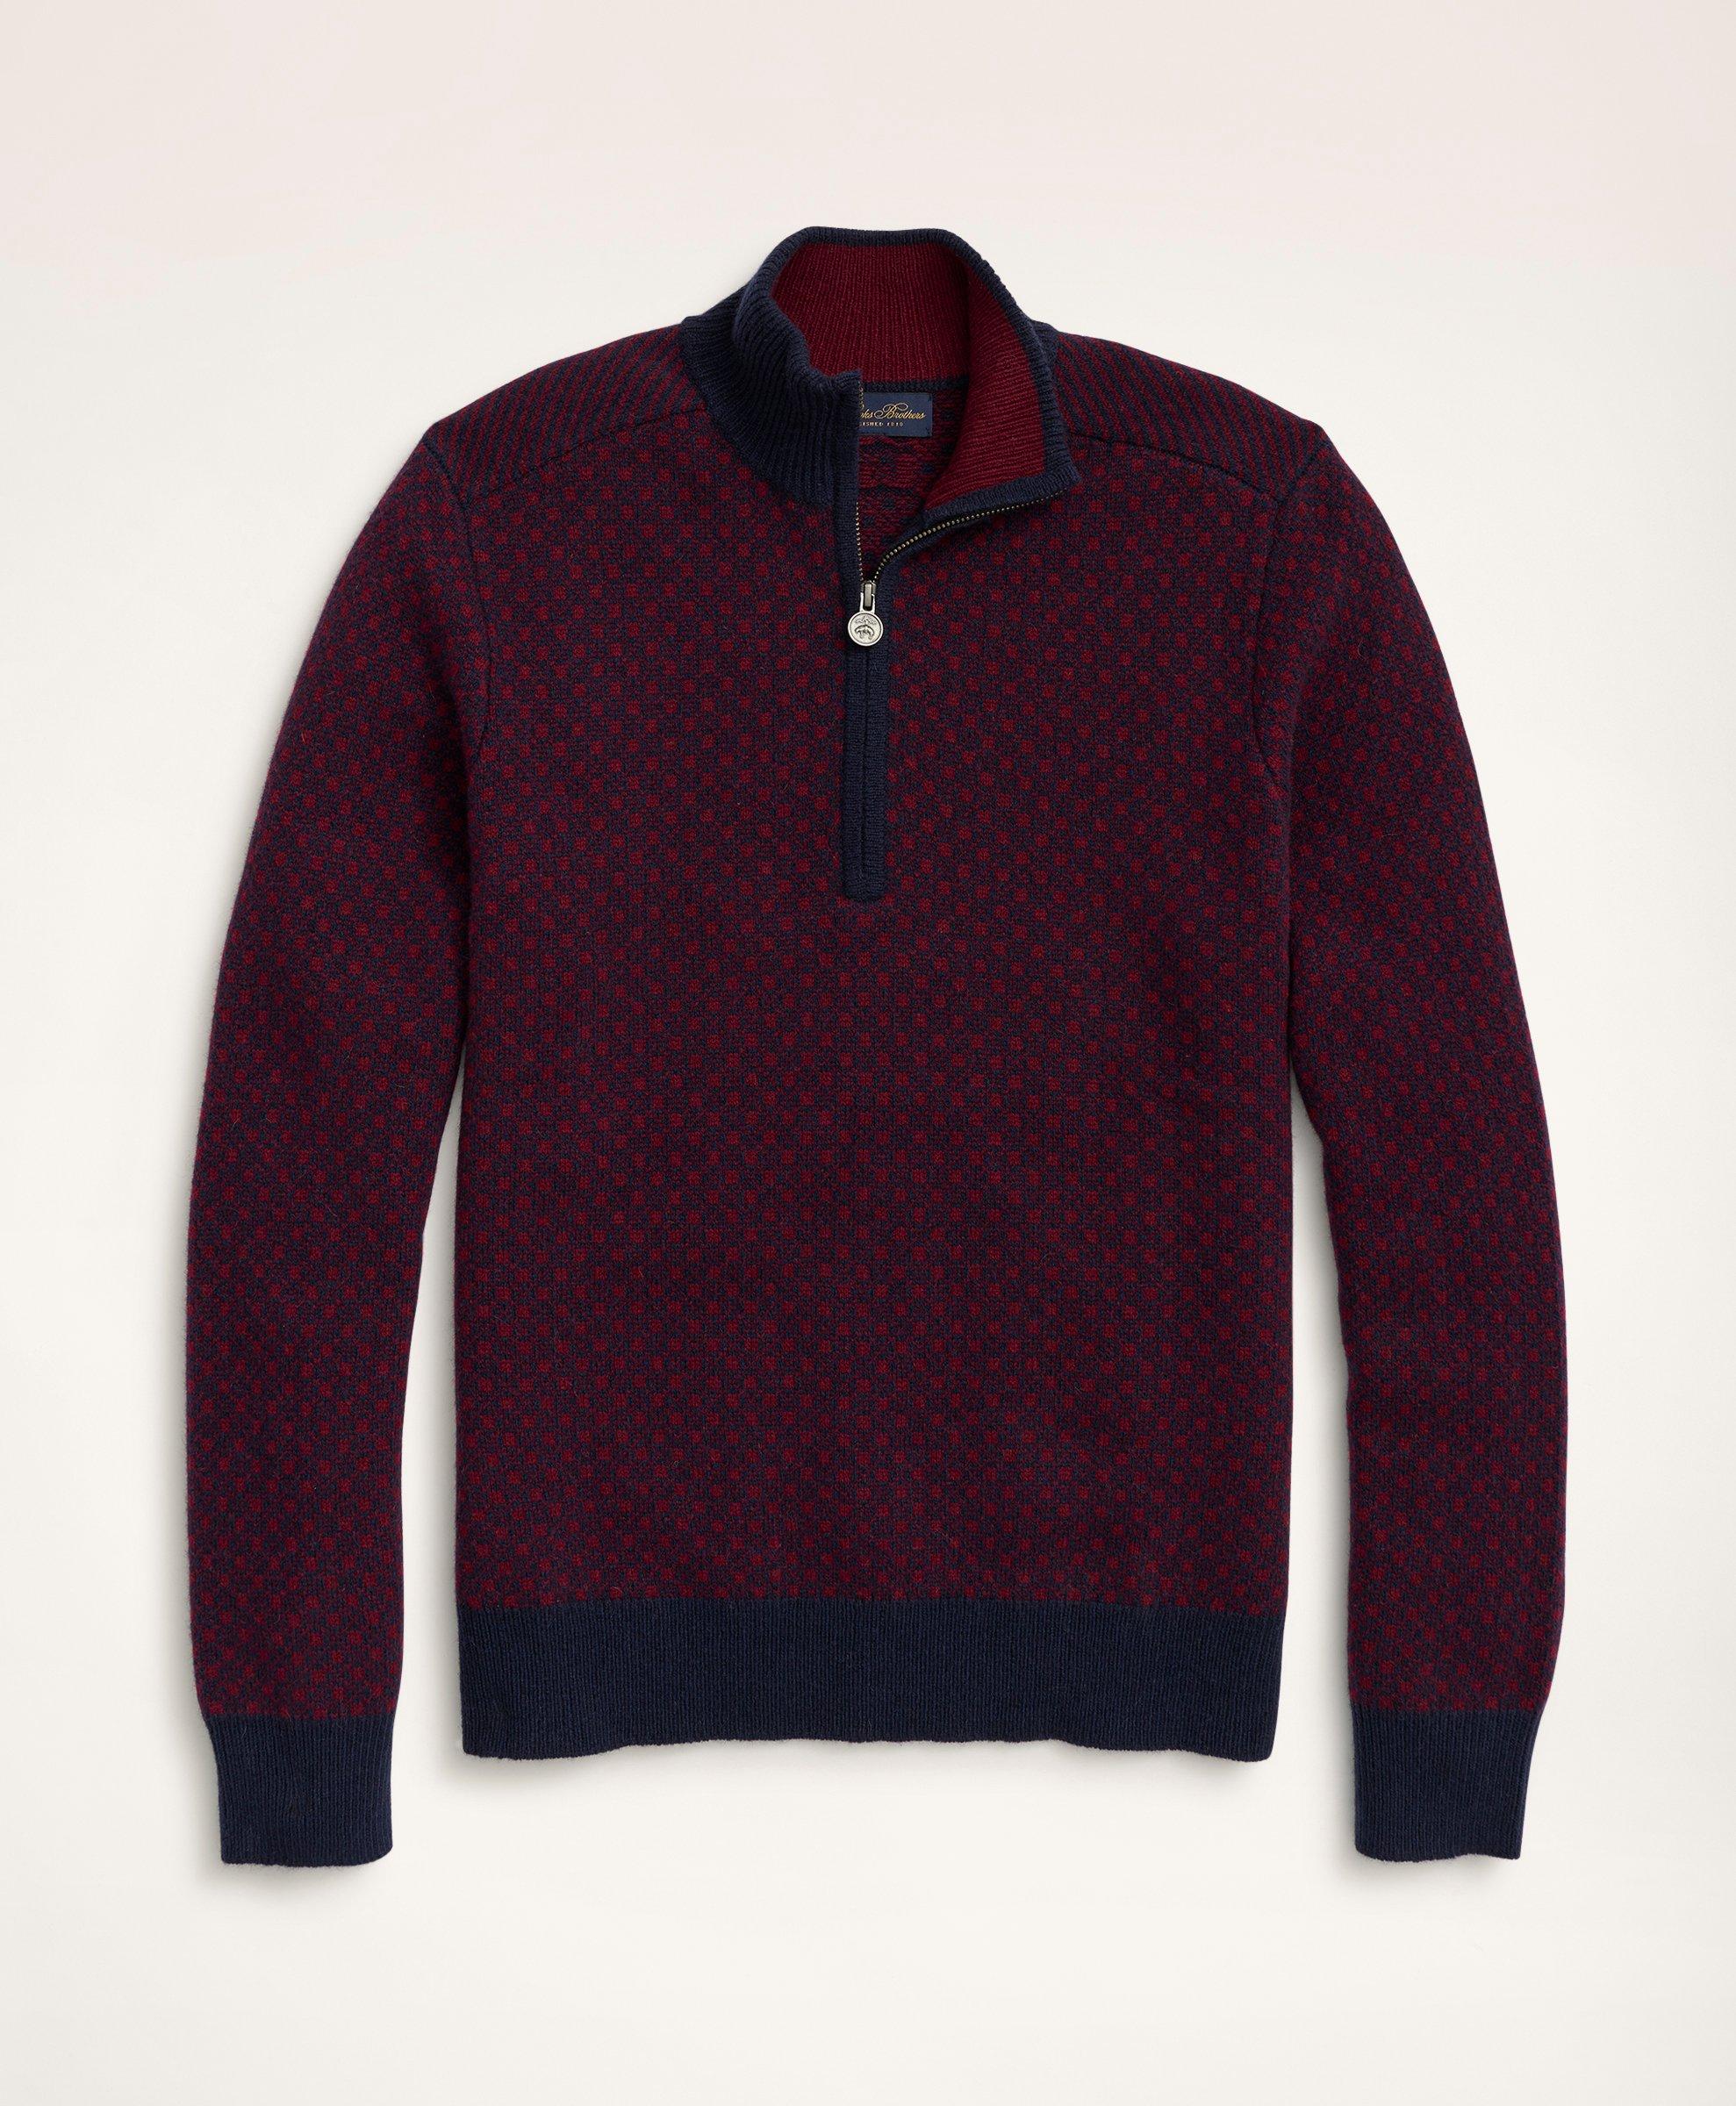 Brooks Brothers Big & Tall Wool Nordic Half-zip Sweater | Burgundy/navy | Size 4x Tall In Burgundy,navy